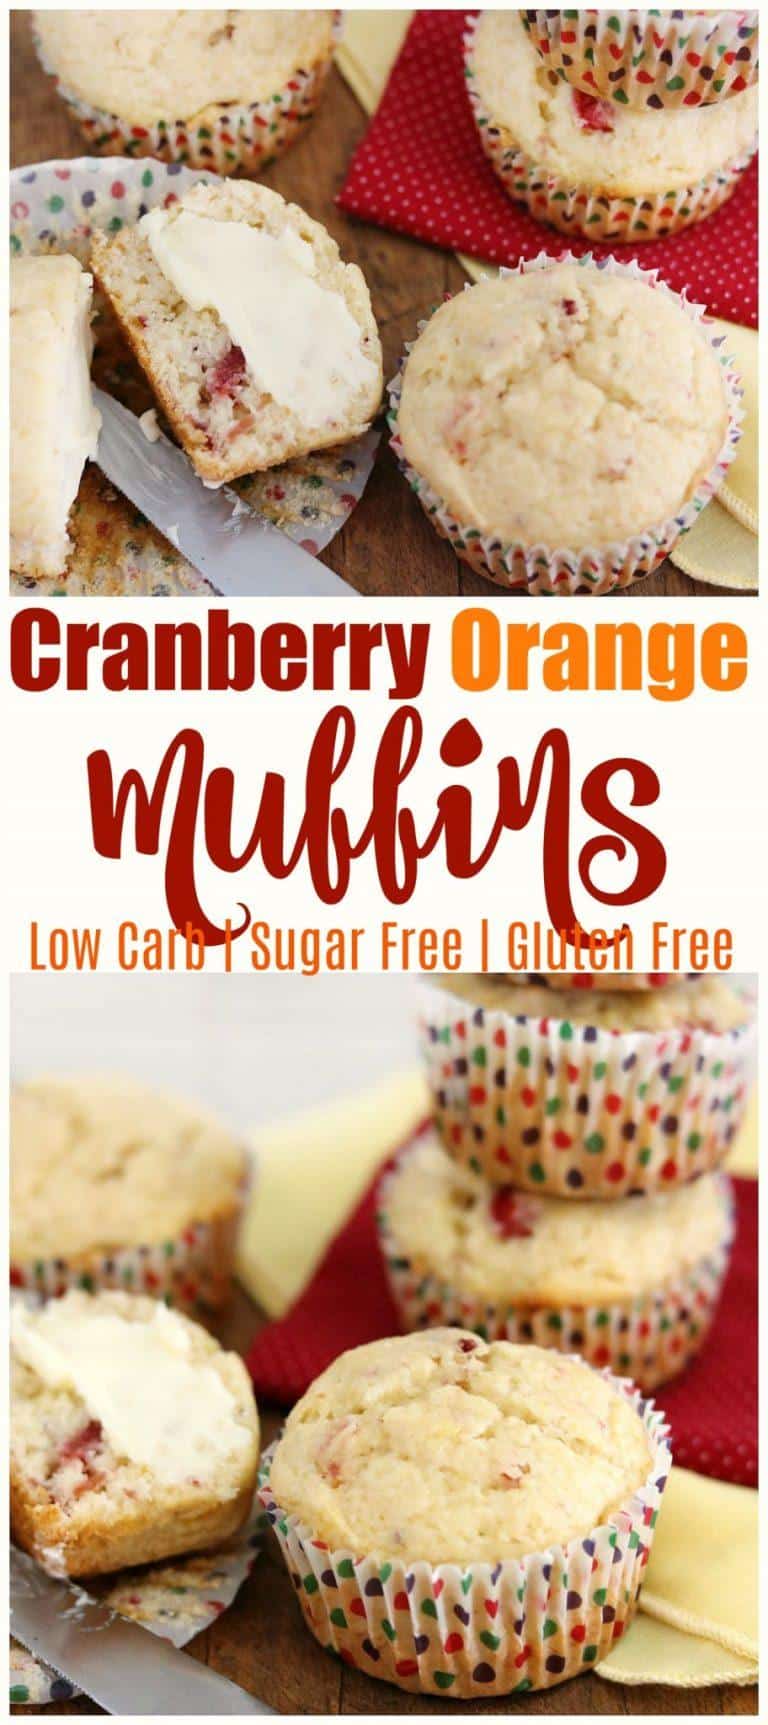 Cranberry Orange Muffins Recipe, Low Carb, Buttery Crunchy Top